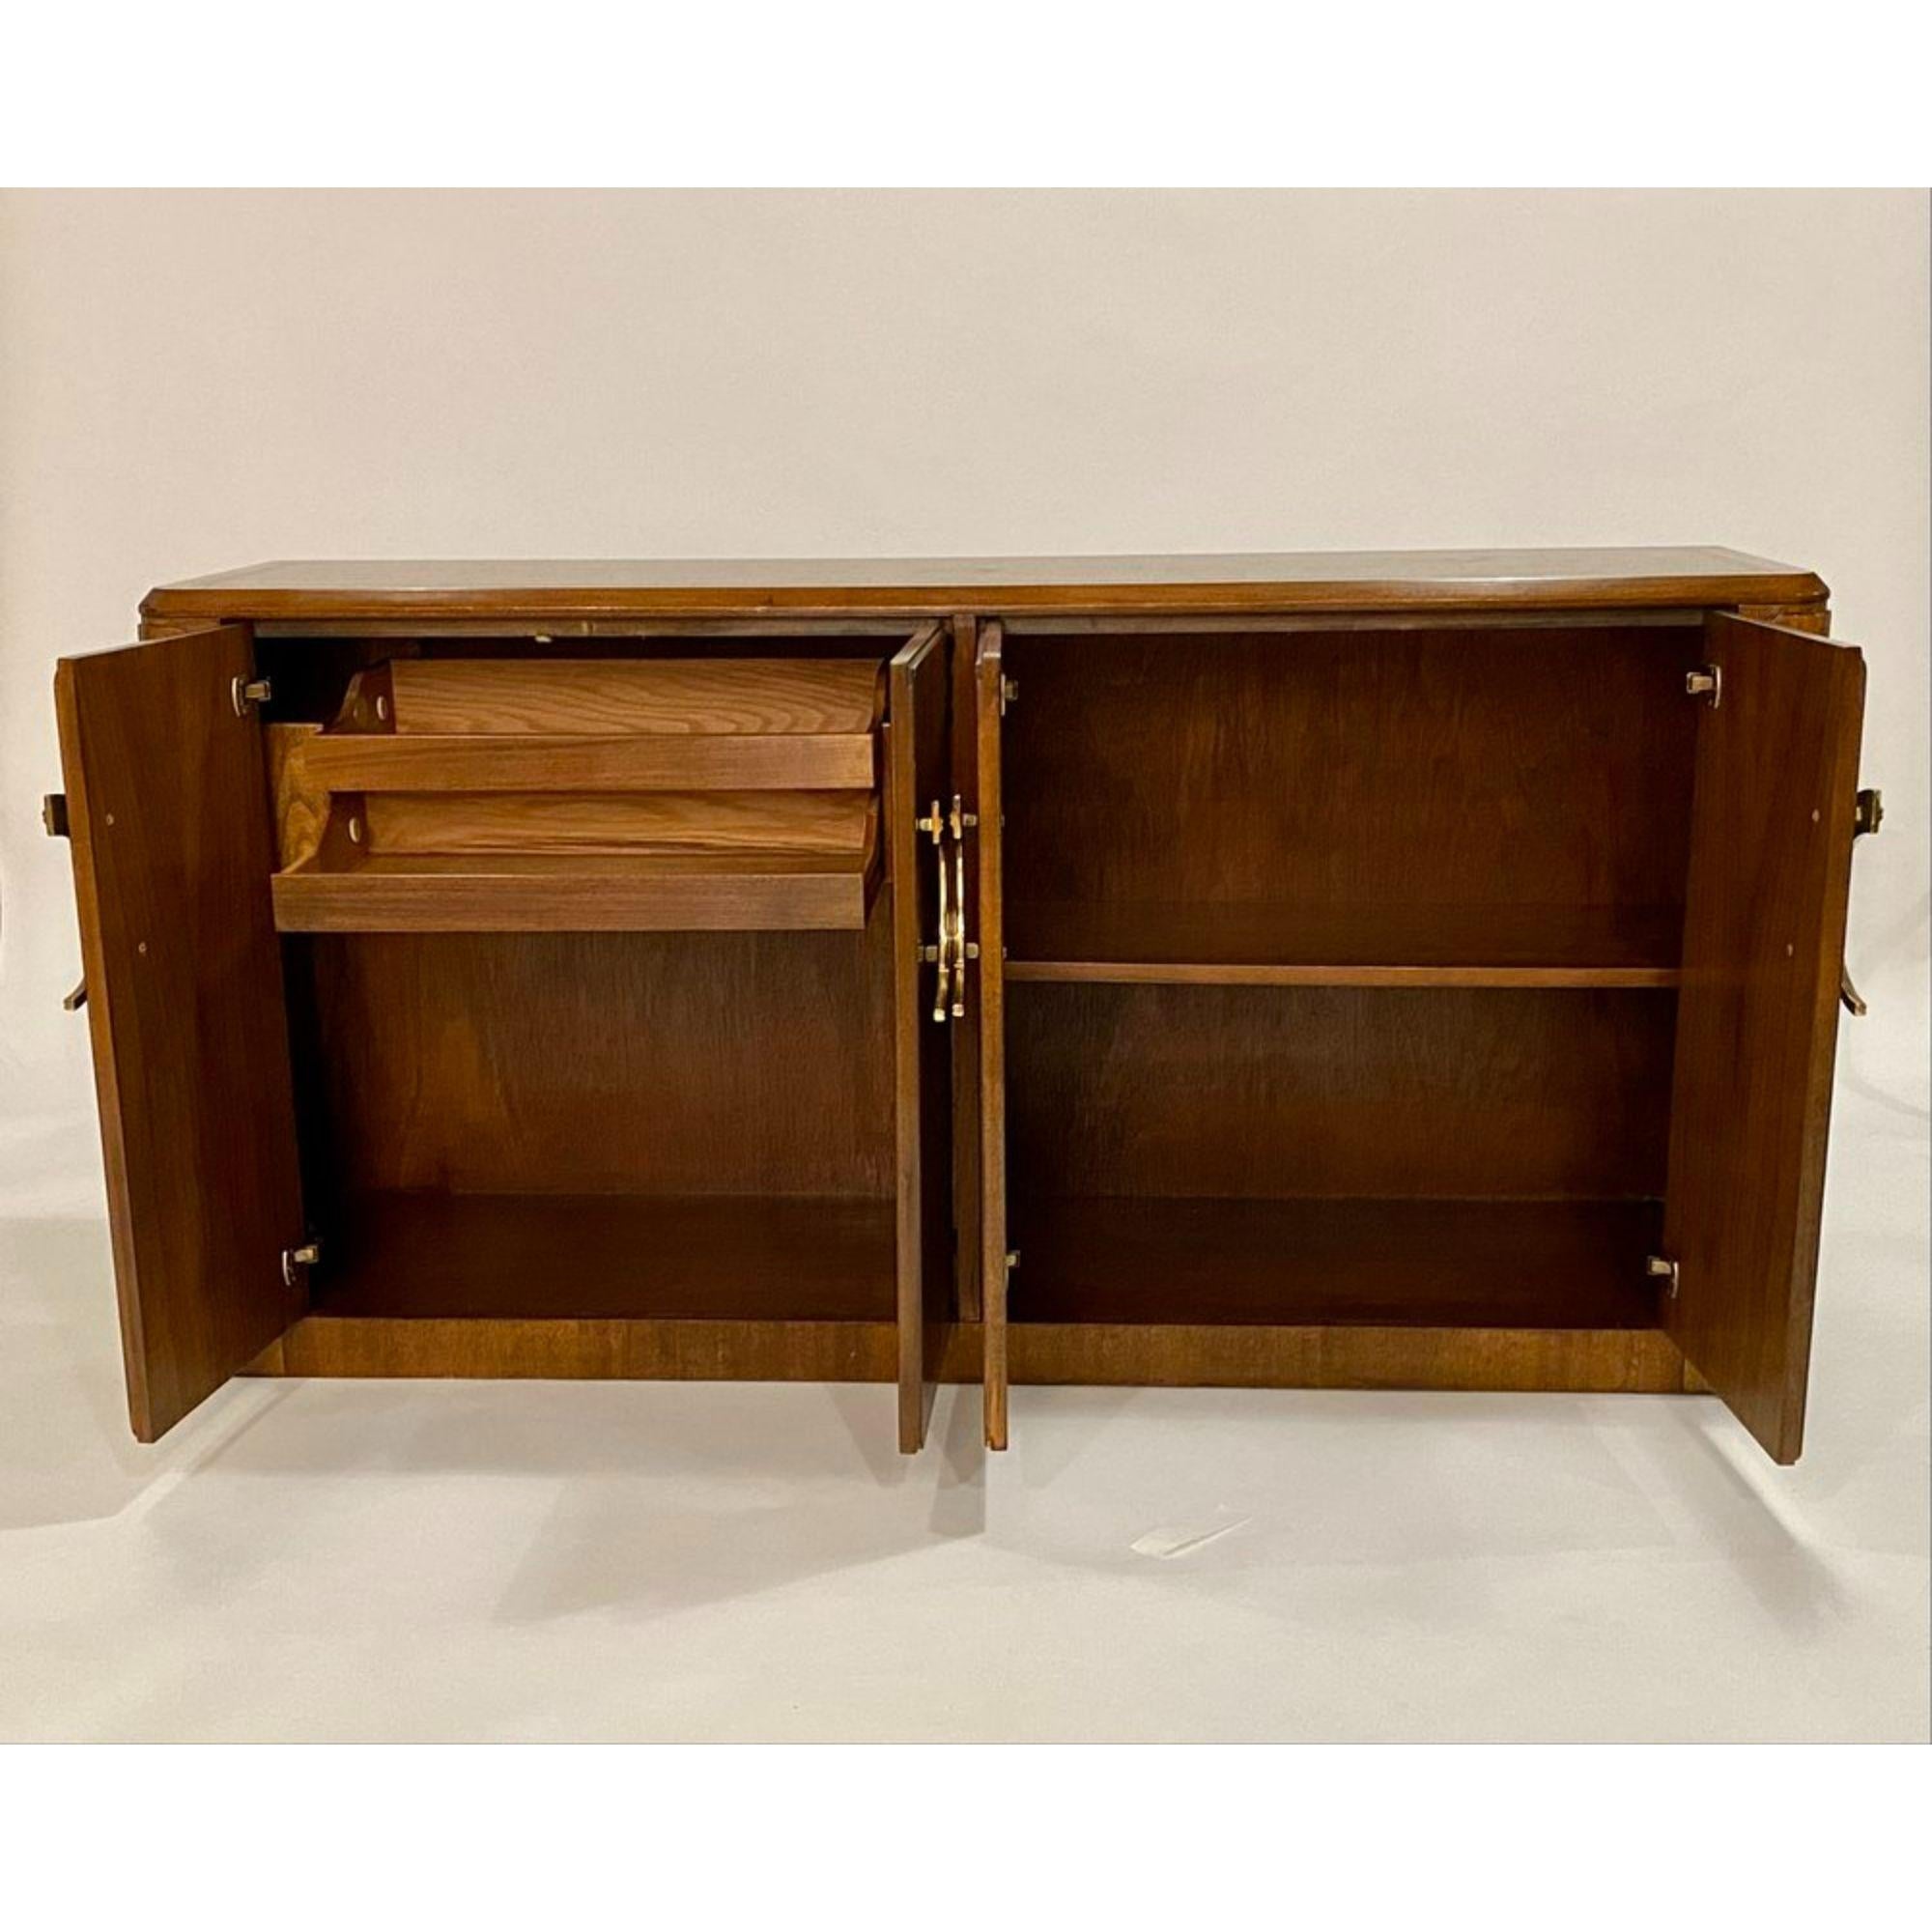 North American Baker Deco Revival Sideboard in Walnut and Brass